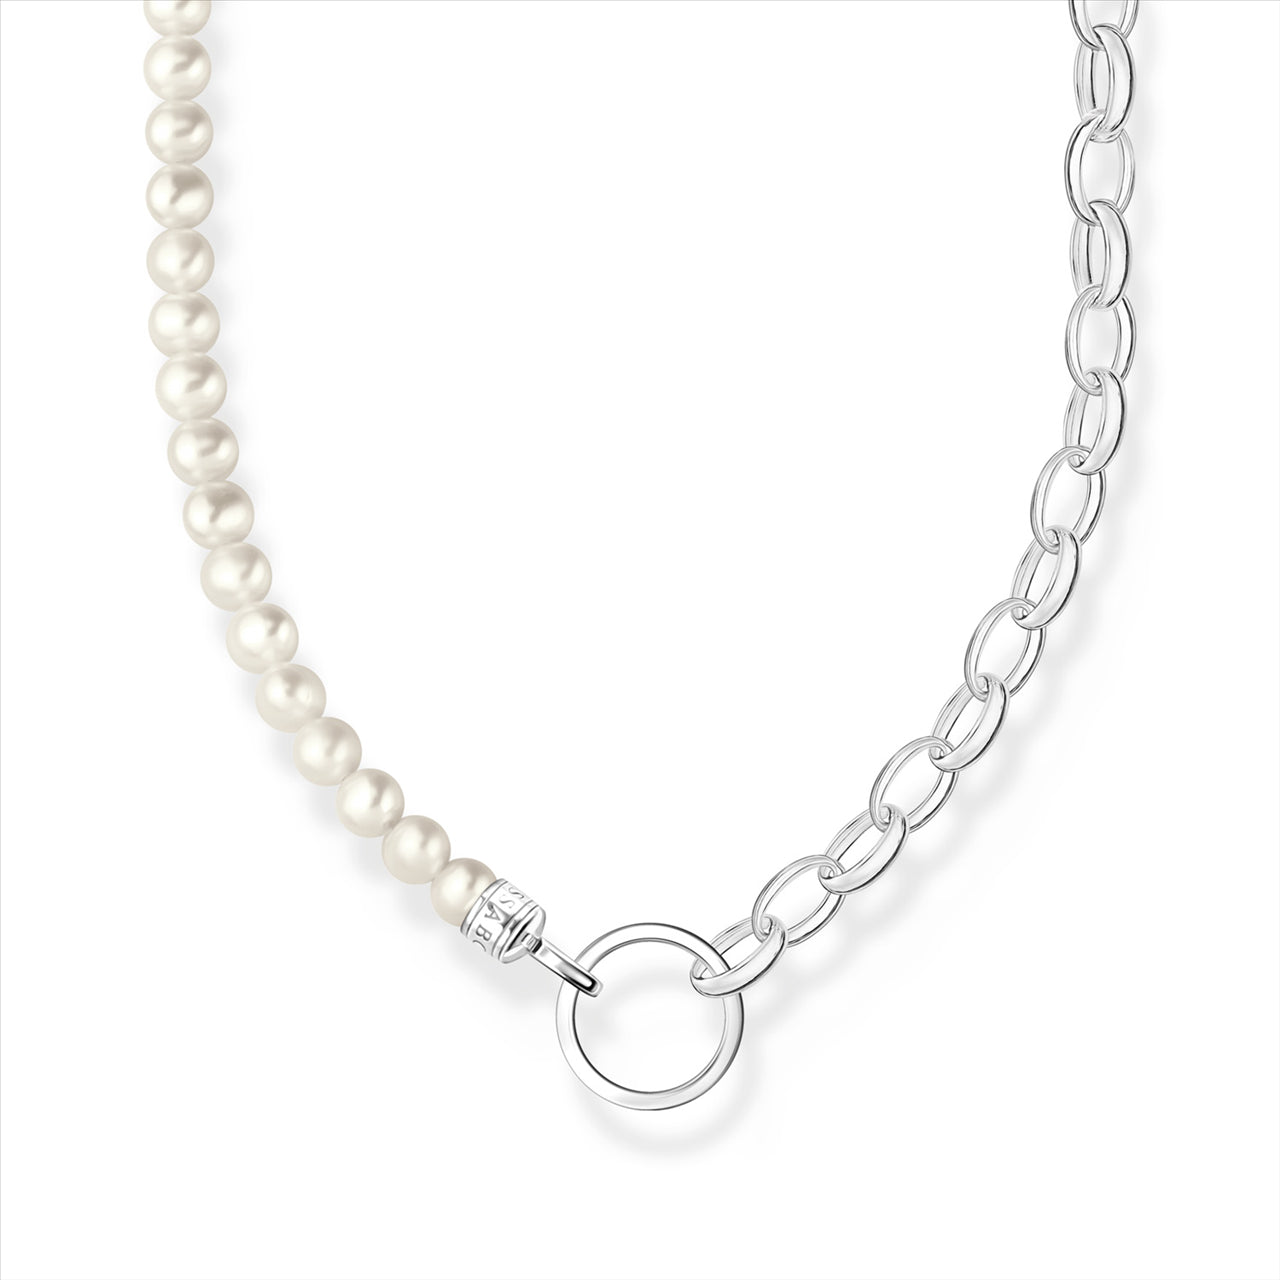 Thomas Sabo Charm Club Freshwater Pearl & Belcher Chain Link Necklace.